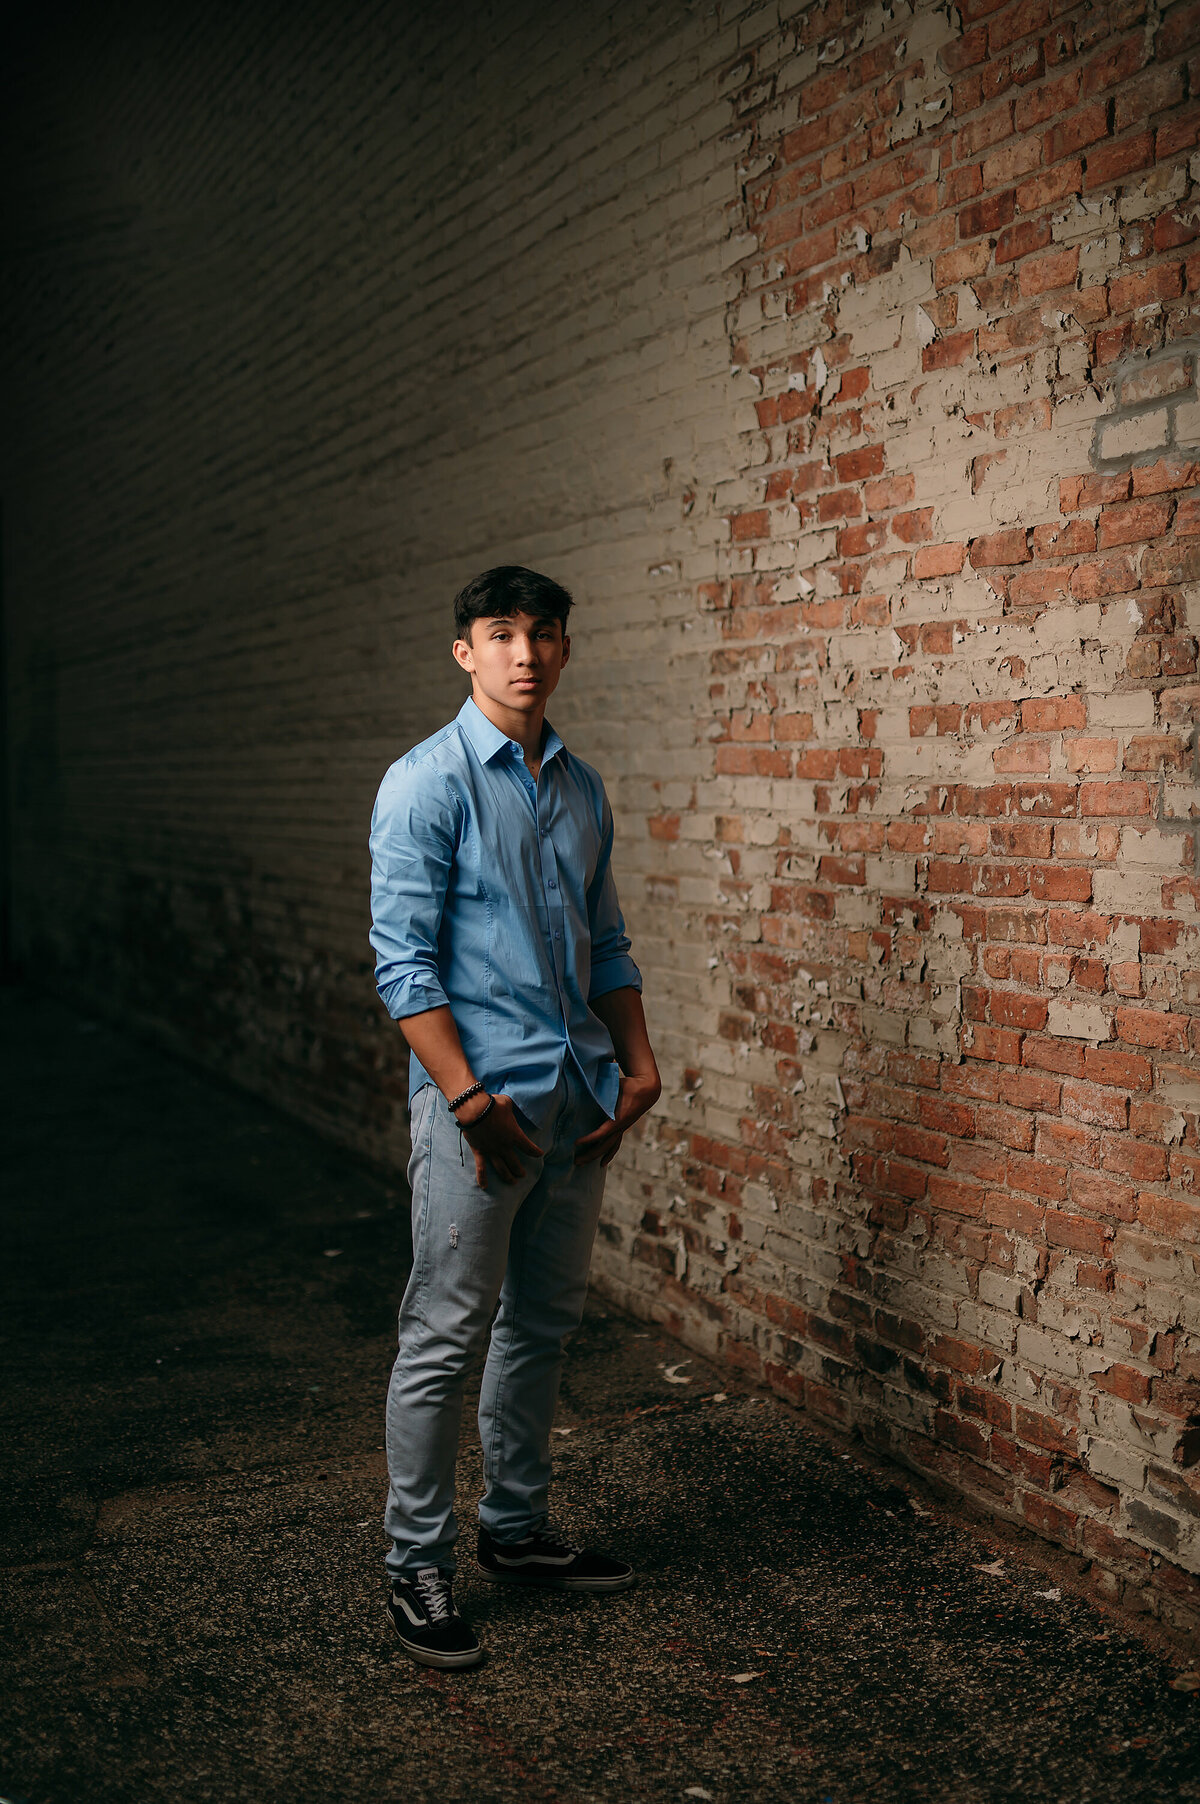 A young man from Waukesha West High School stands along a distressed brick wall in the Downtown area for his senior portraits.